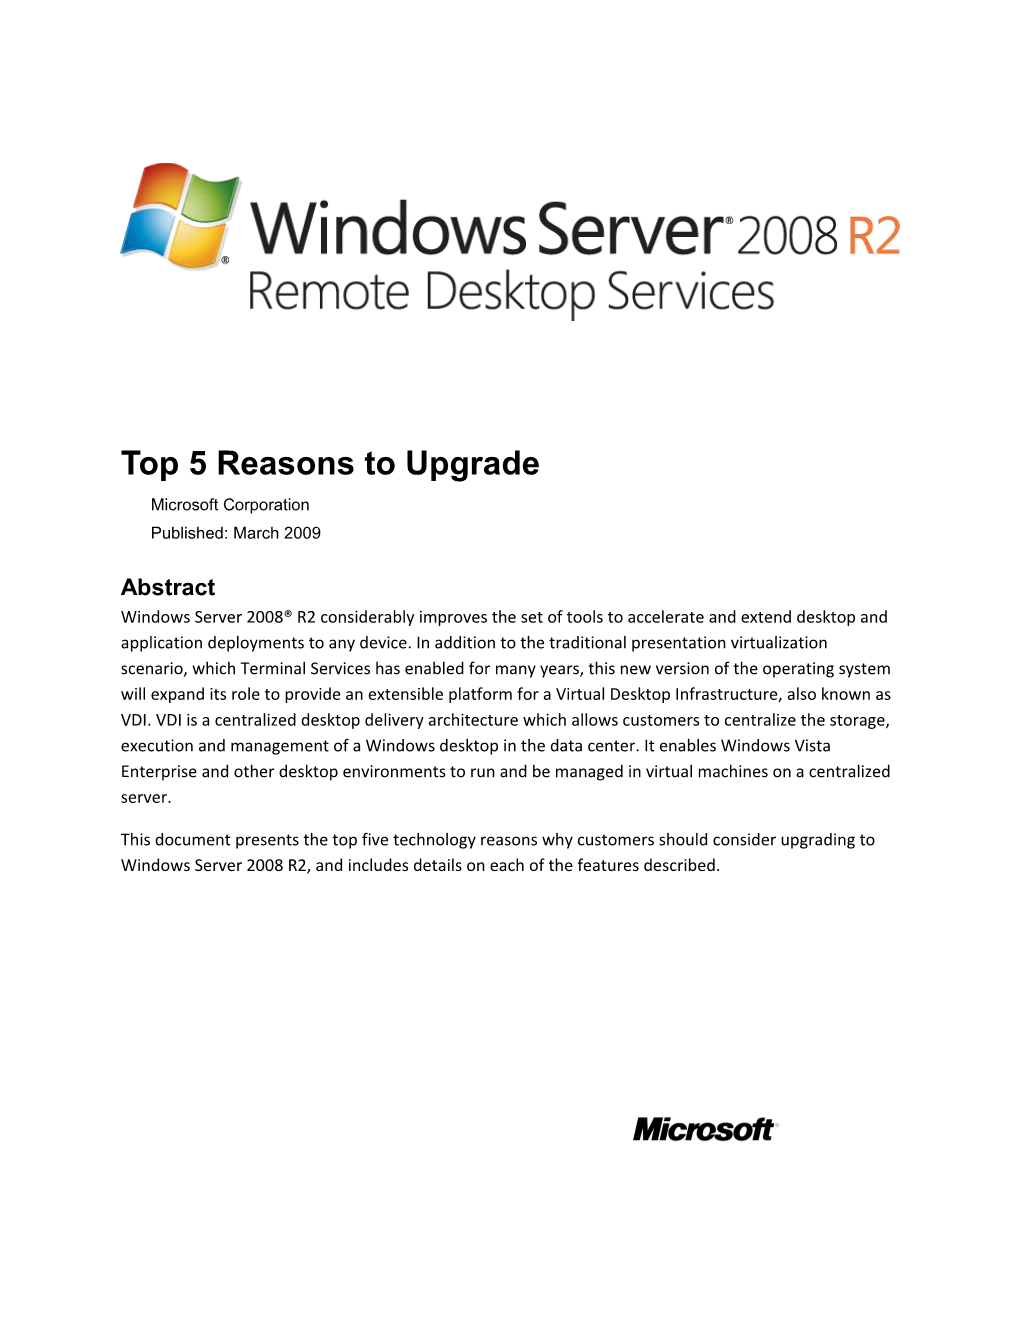 Top 5 Reasons to Upgrade